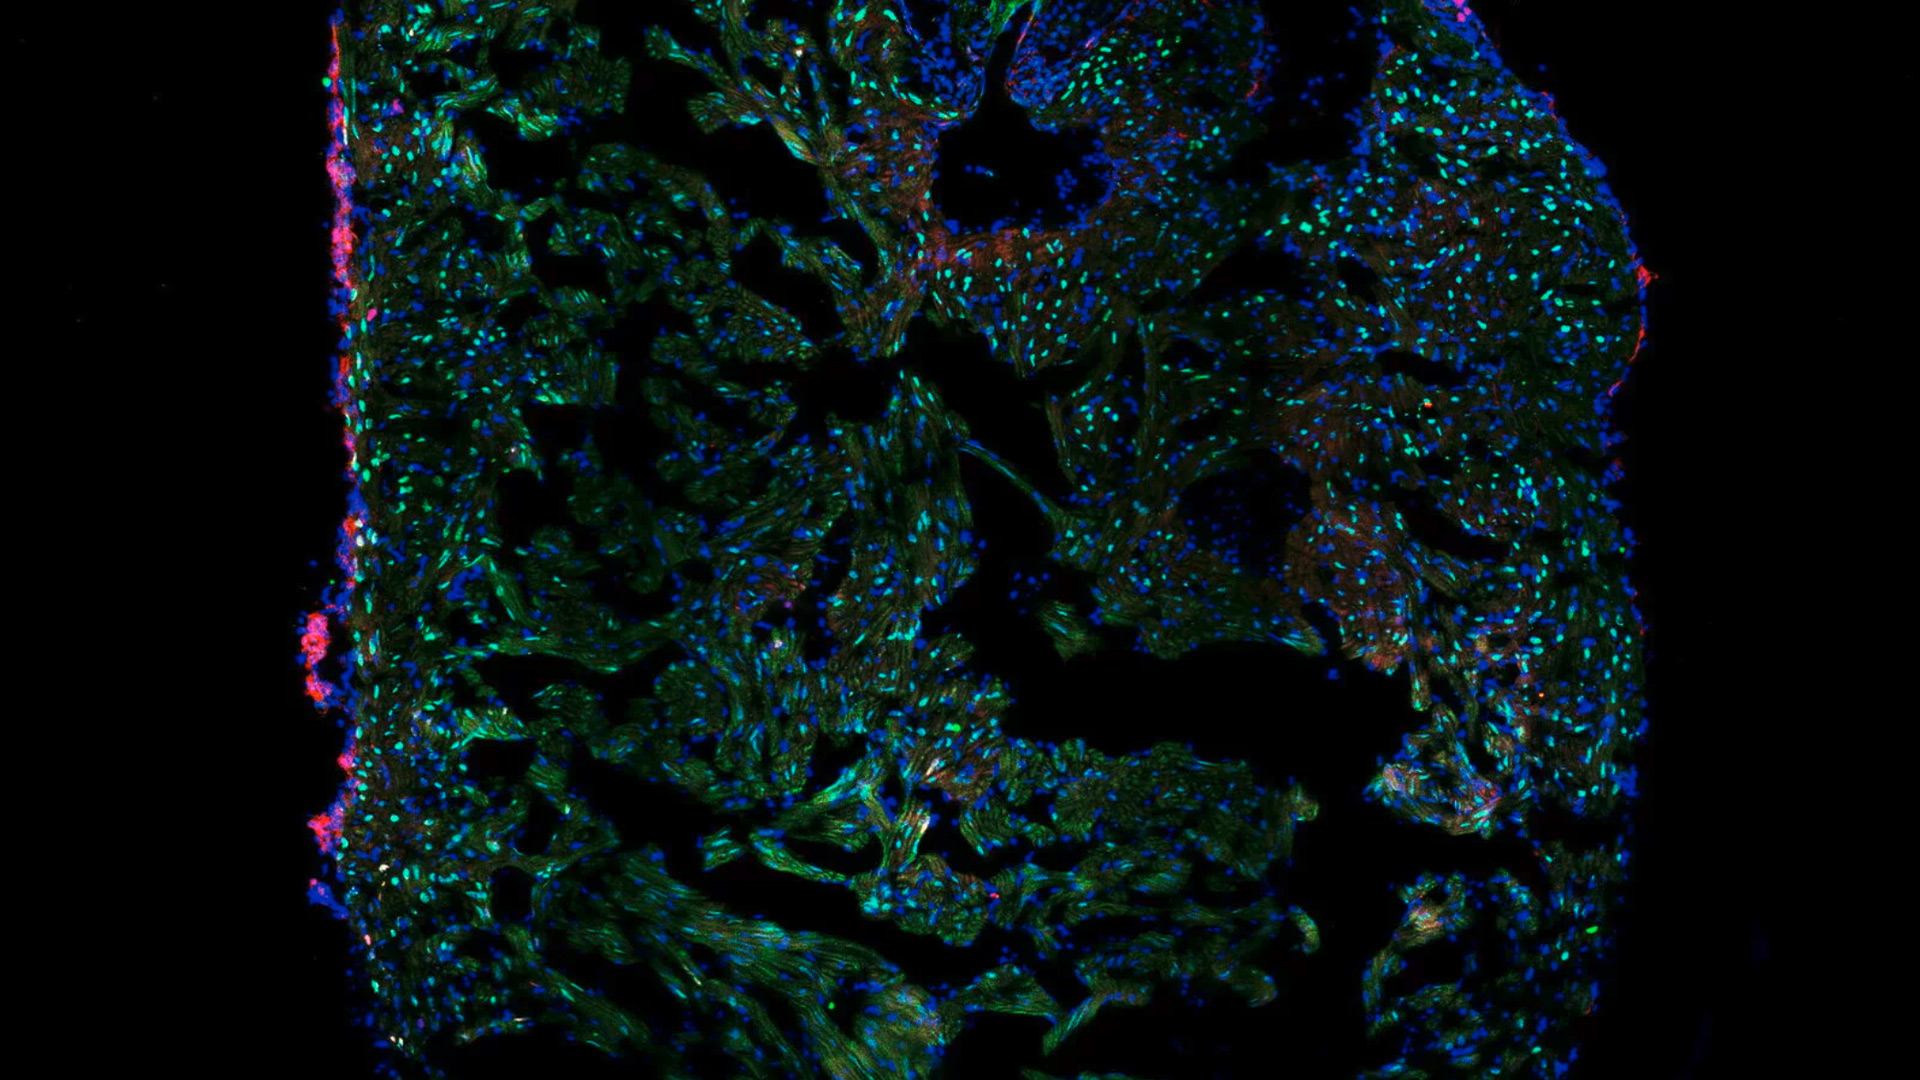 Single slice taken from a zebrafish heart showing the ventricle with an injury in the lower area. Image shows the nuclei of all cells (blue), nuclei of the cardiomyocyte (heart muscle cells, green) and the proliferating cells (red). Image courtesy of Laura Peces-Barba Castaño, Max Planck Institute for Heart and Lung Research. 